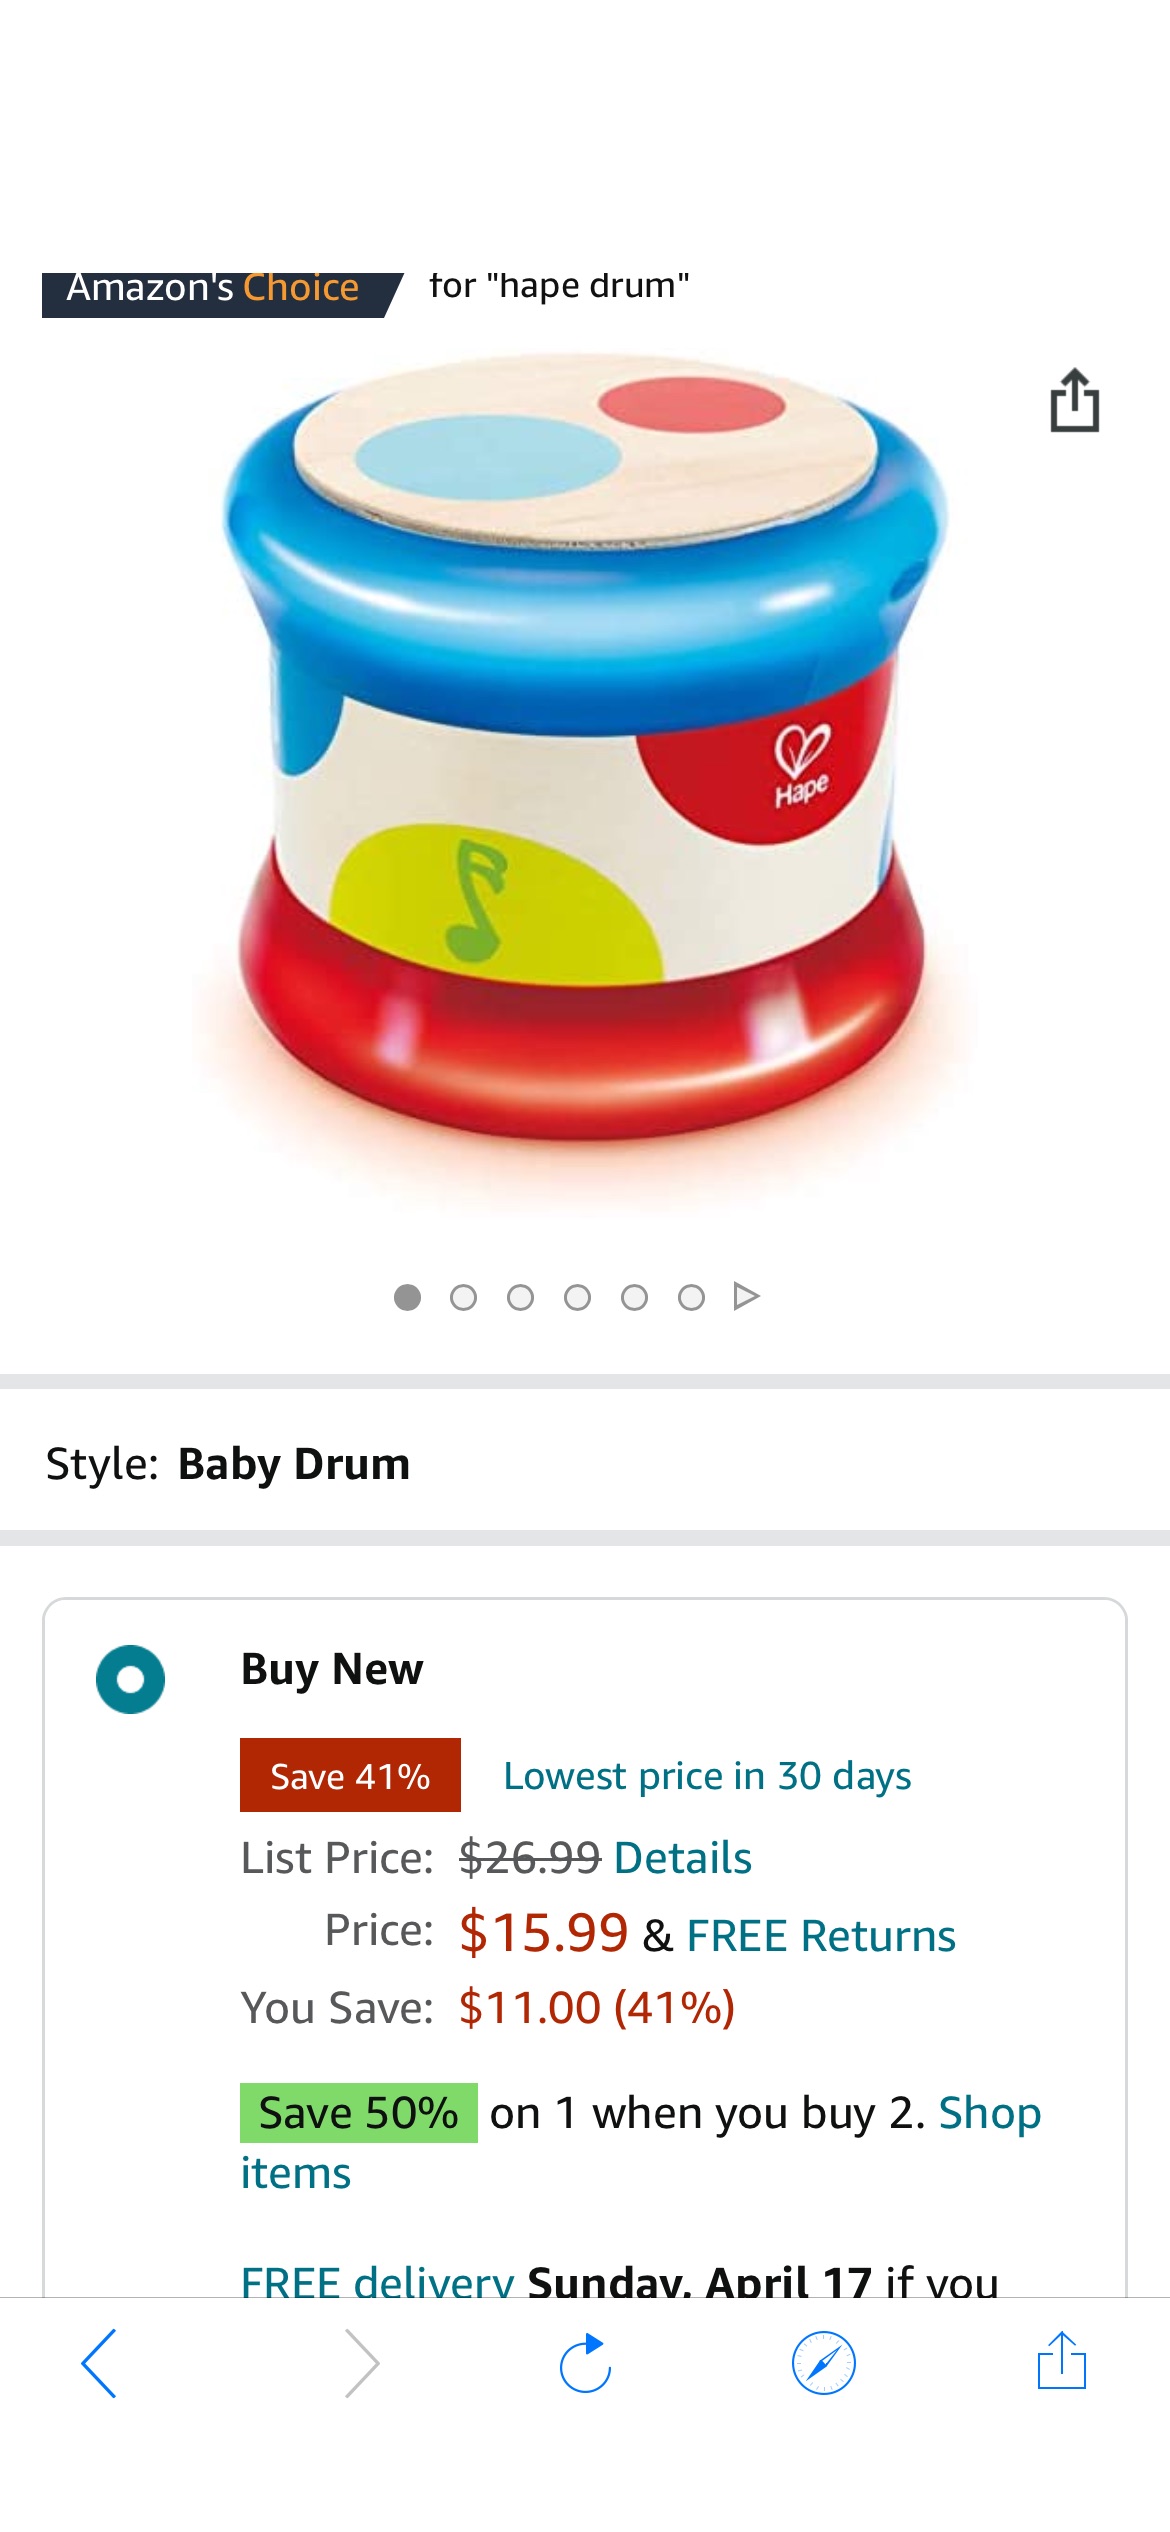 Amazon.com: Hape Baby Drum | Colorful Rolling Drum Musical Instrument Toy For Toddlers, Rhythm & Sound Learning, Battery Powered (E0333), hape手鼓